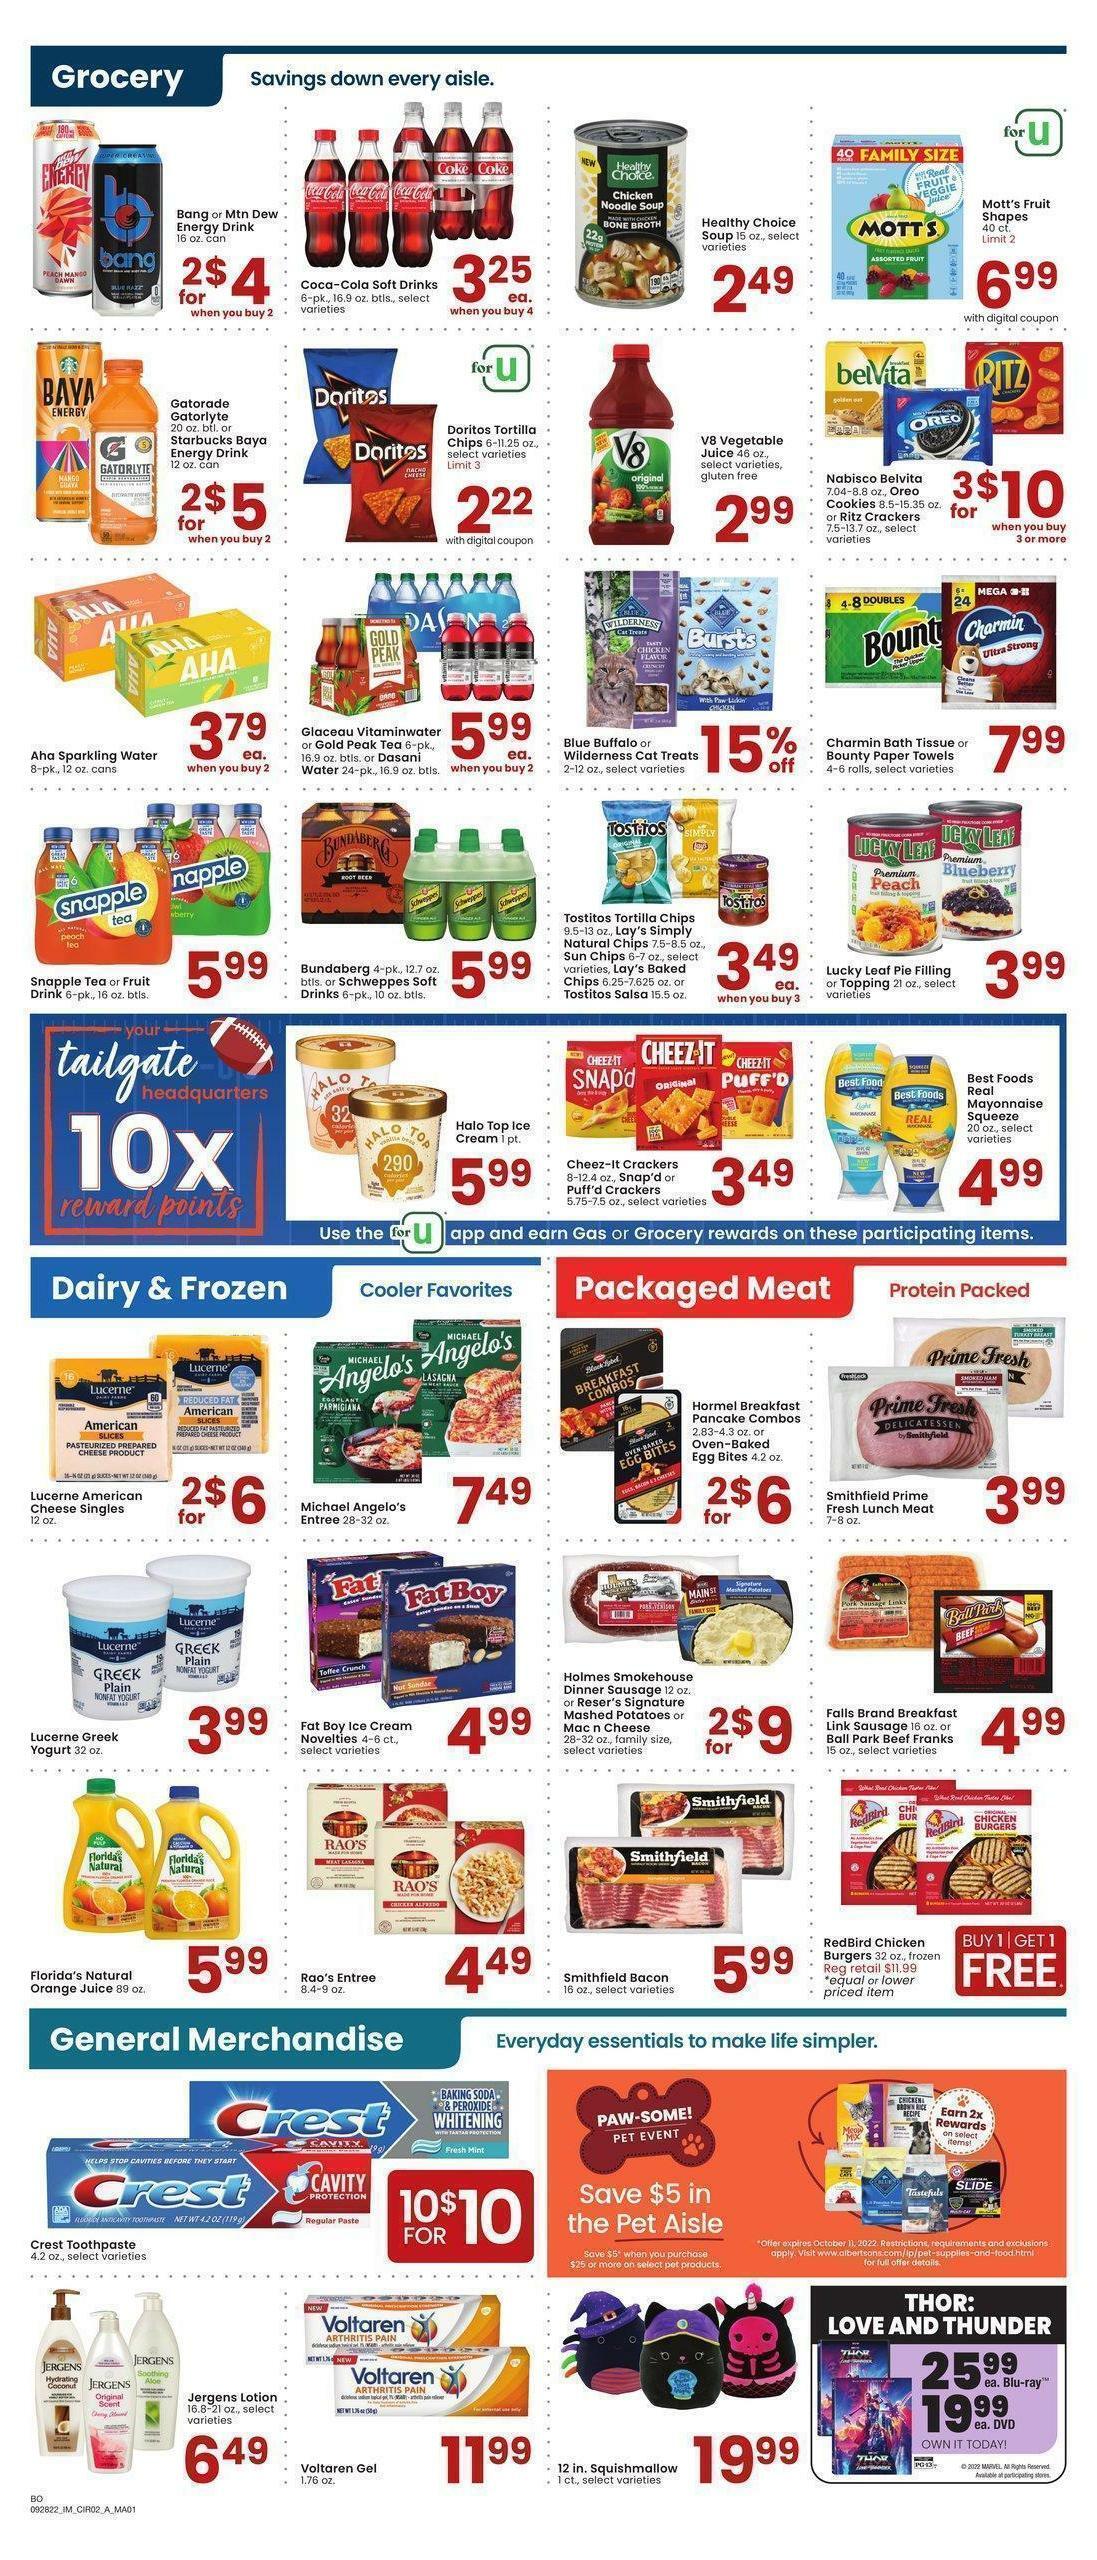 Albertsons Weekly Ad from September 28